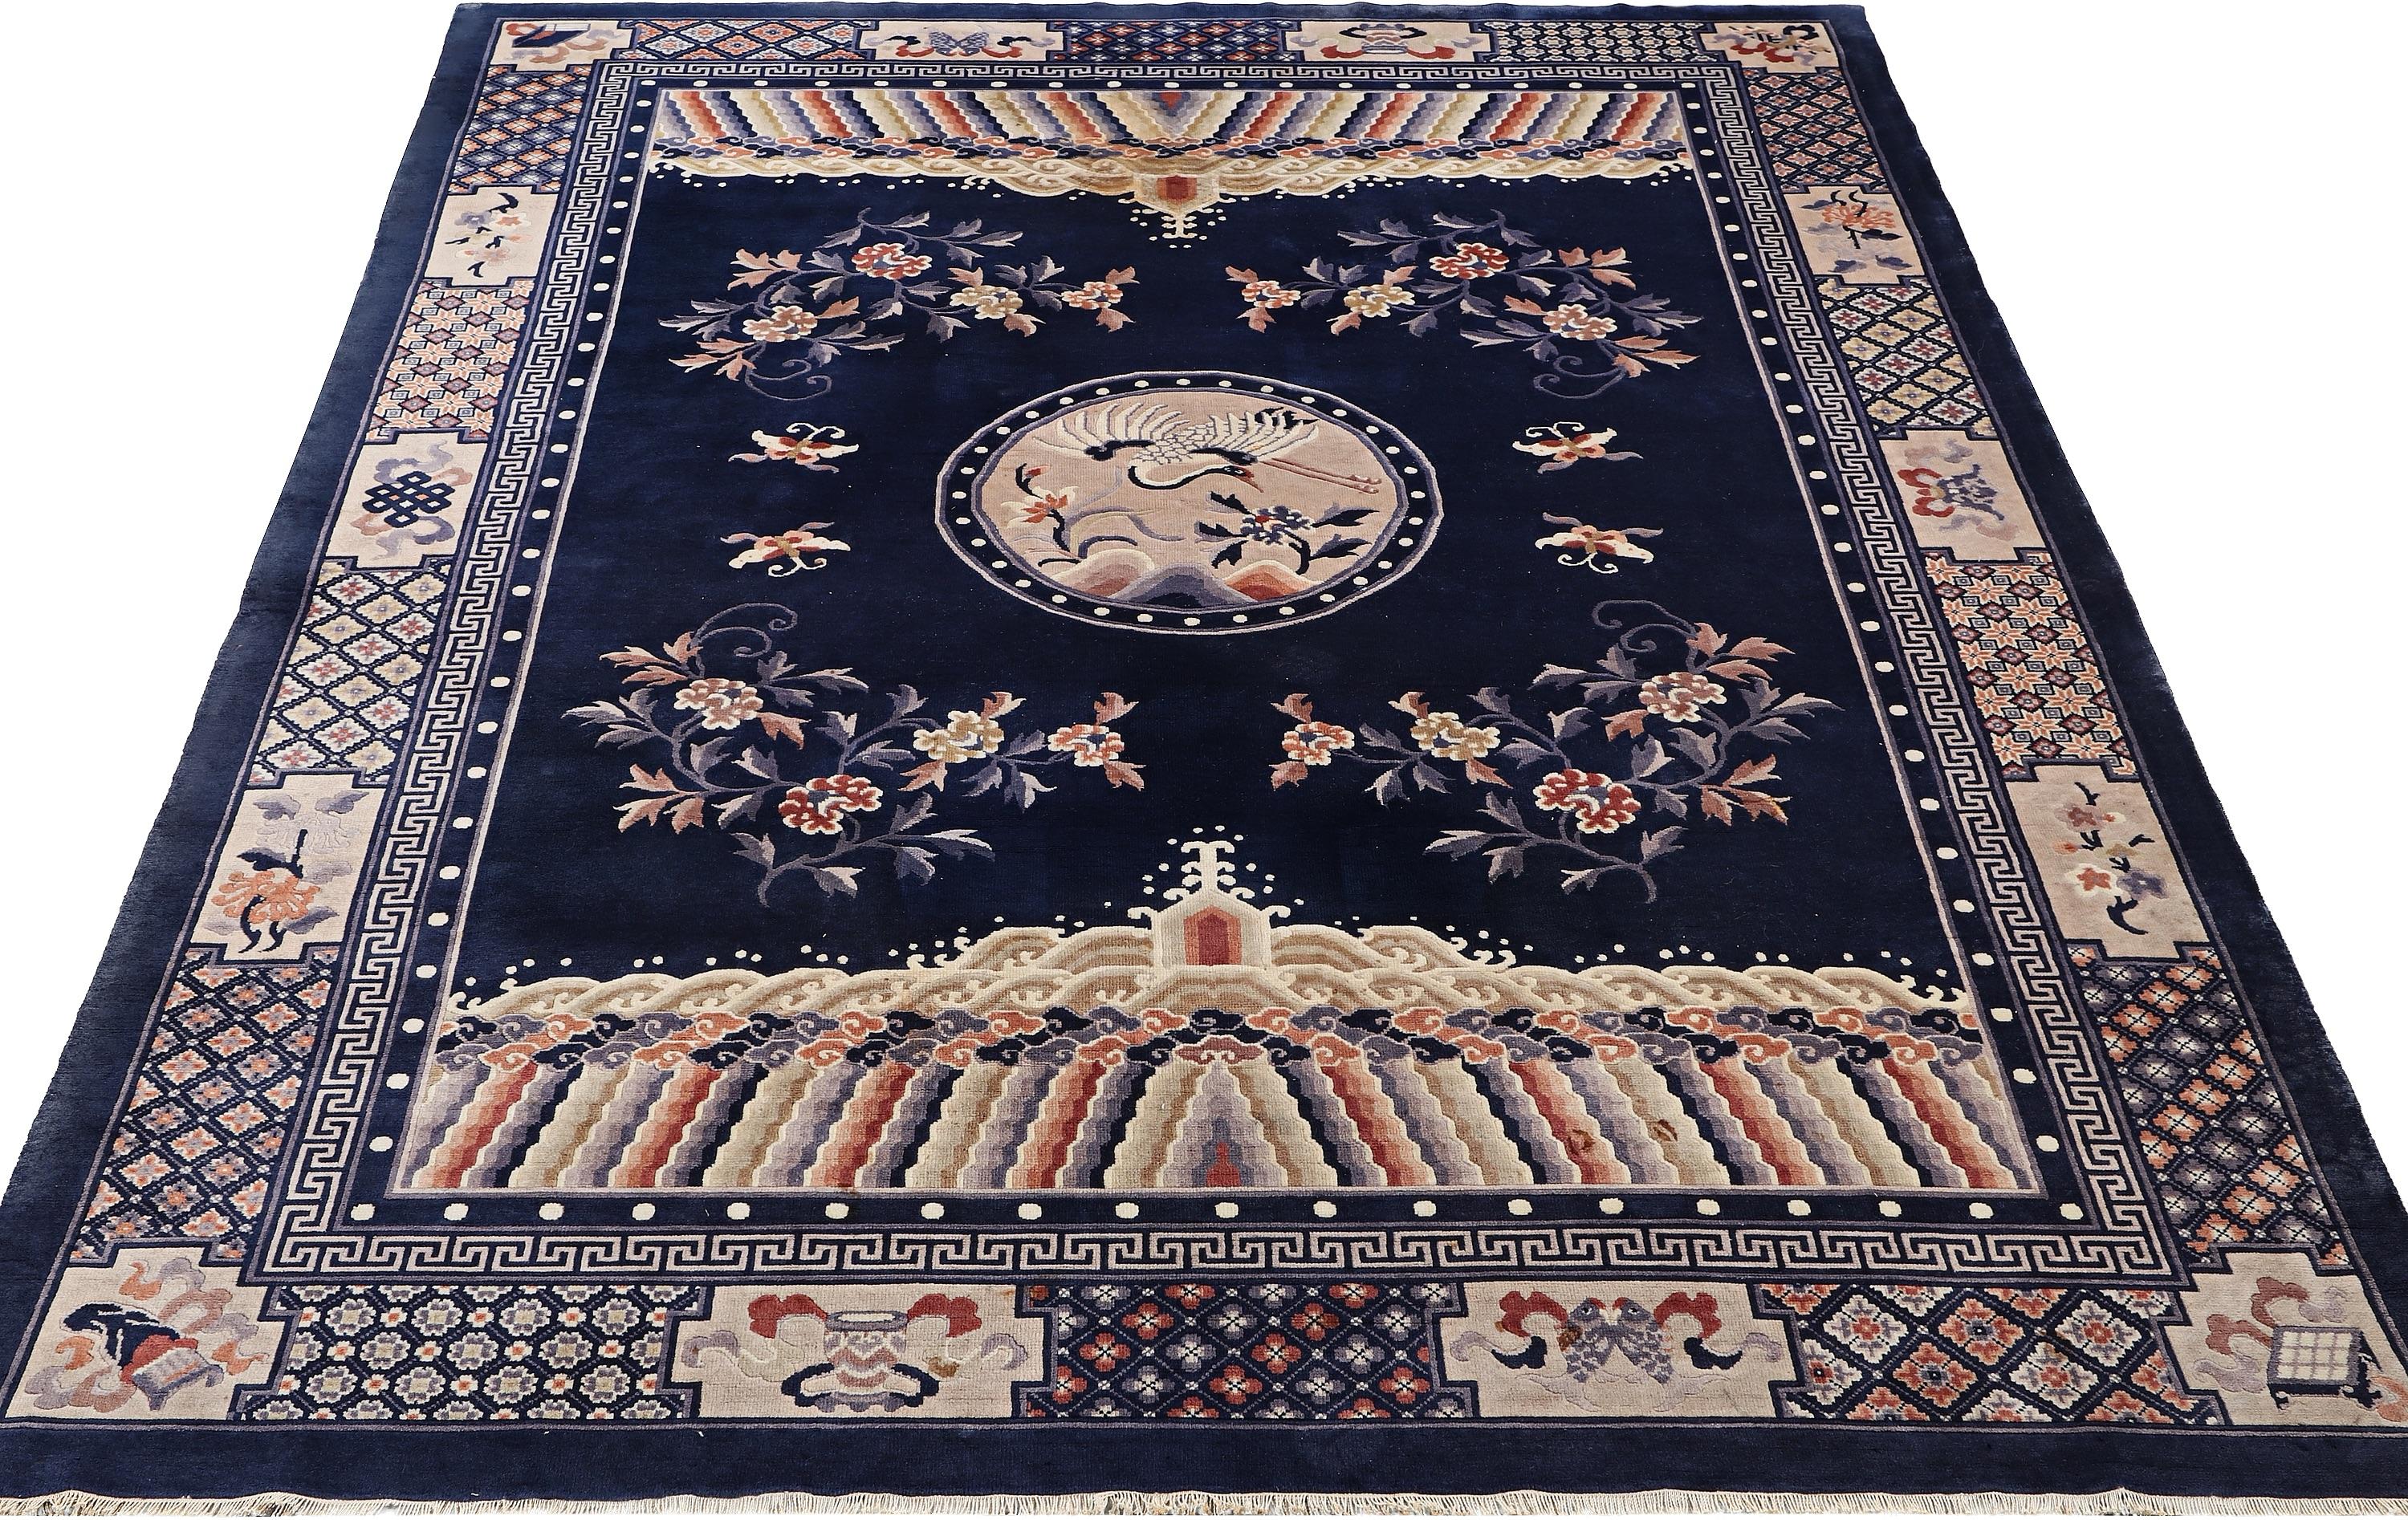 Beijing/Pekin rug, Antique Finish circa 1950/70.
Peking rugs are much more compact than Ningxia because their tighter weave, they are large, the wool is shinier. The earliest Beijing designs resemble those of the Ningxia.

At the end of the